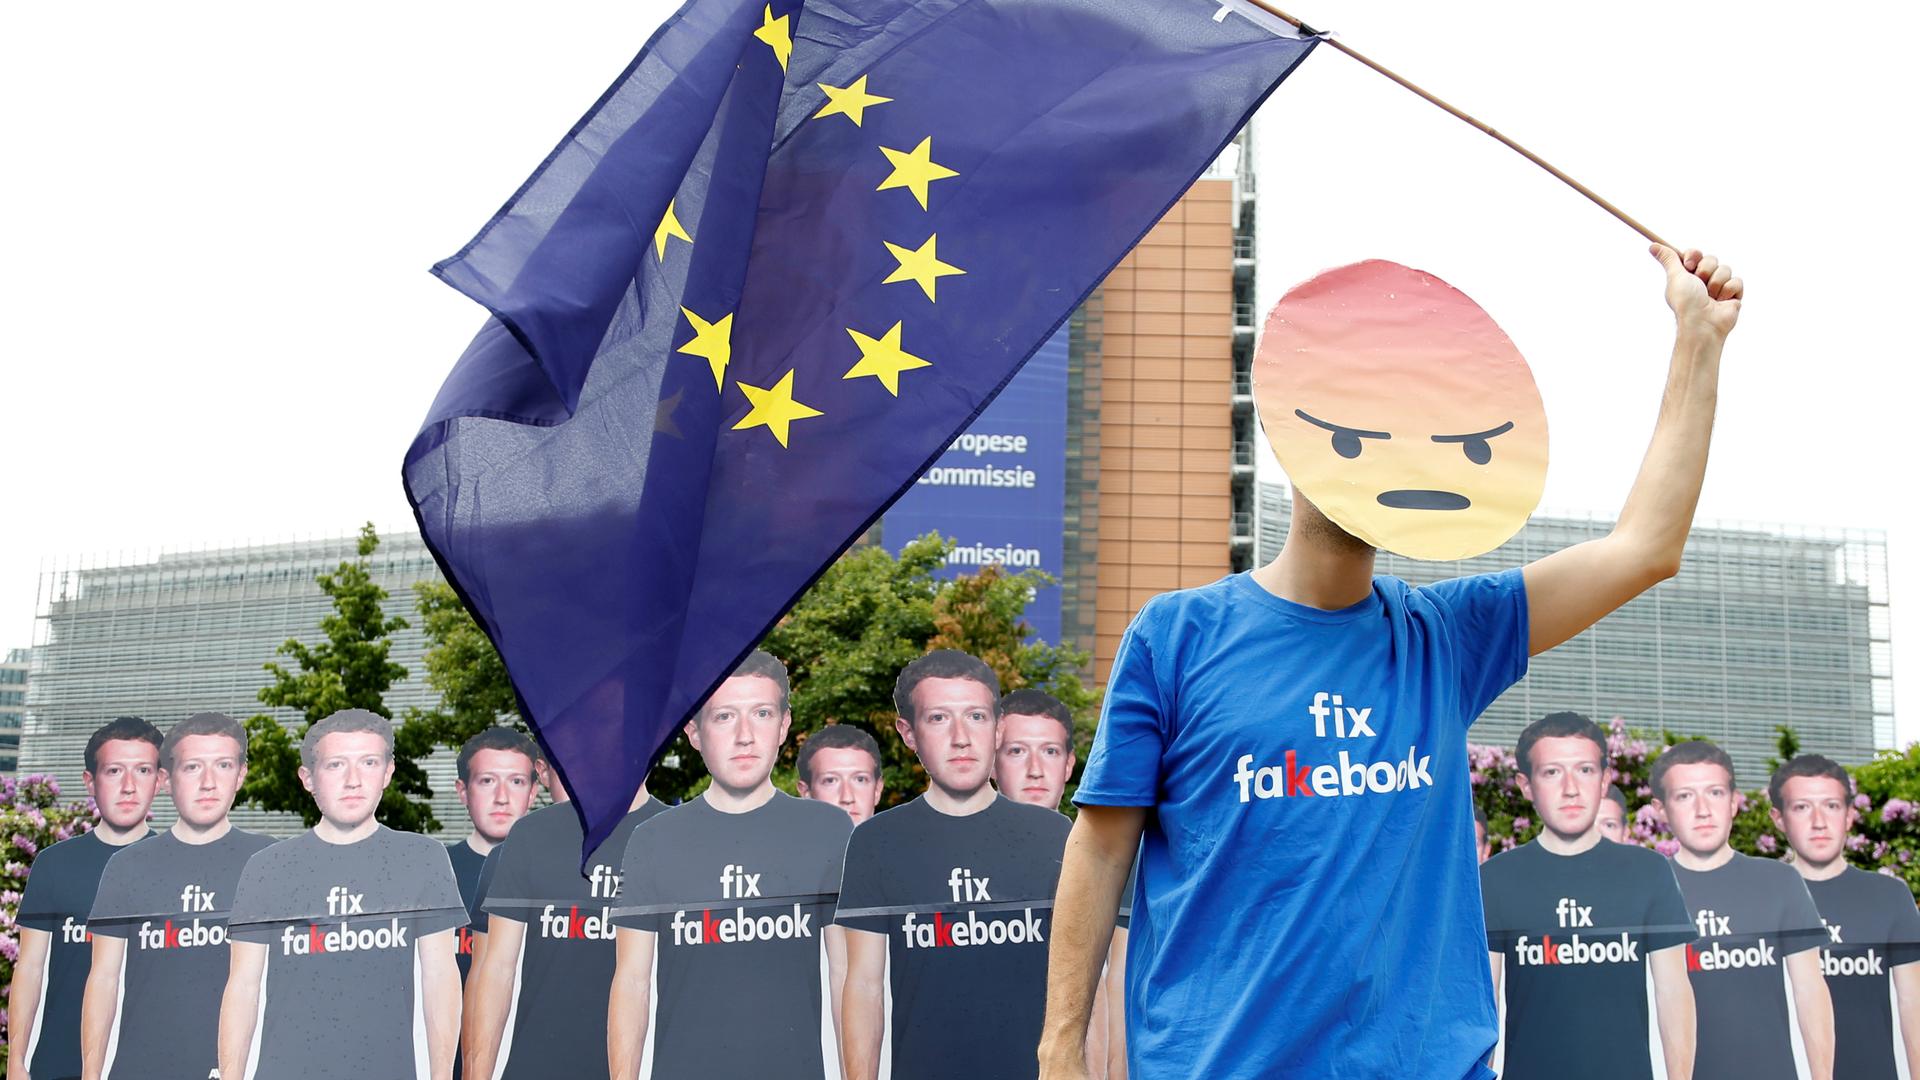 A protester holds an European Union flag next to cardboard cutouts depicting Facebook CEO Mark Zuckerberg during a demonstration ahead of a meeting between Zuckerberg and leaders of the European Parliament in Brussels, Belgium, May 22, 2018.